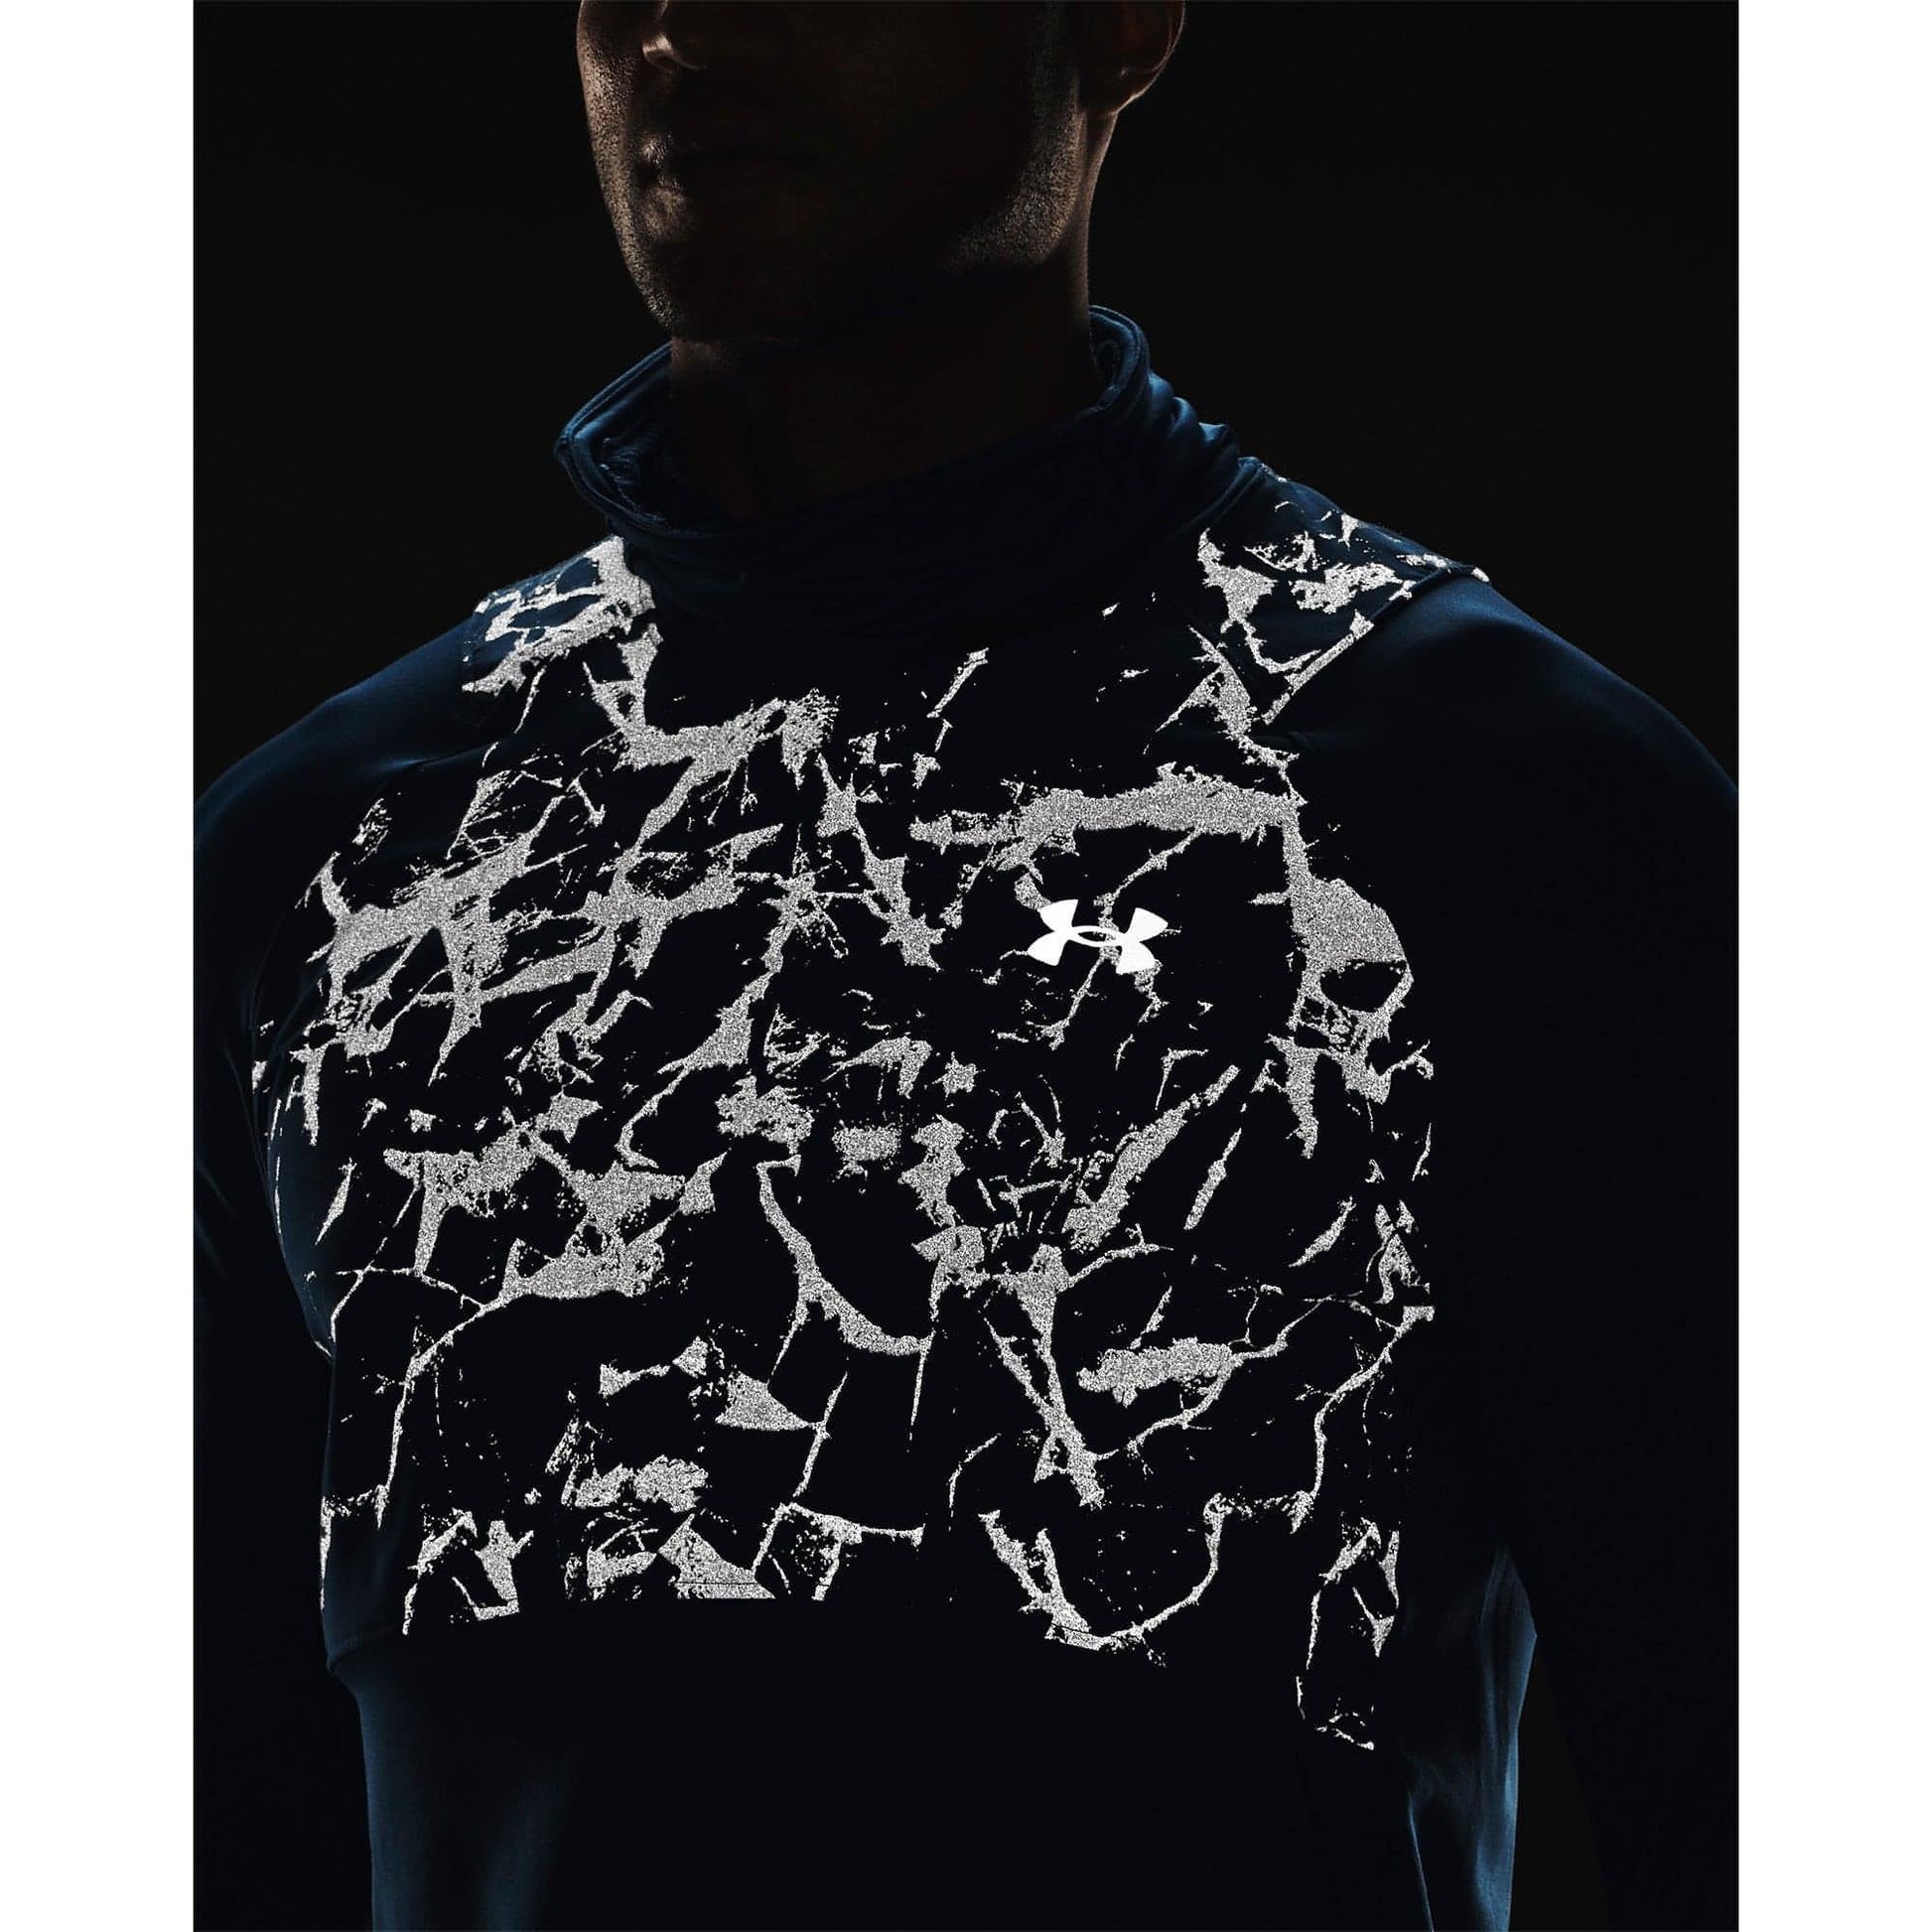 Under Armour Outrun The Cold Funnel Long Sleeve Details